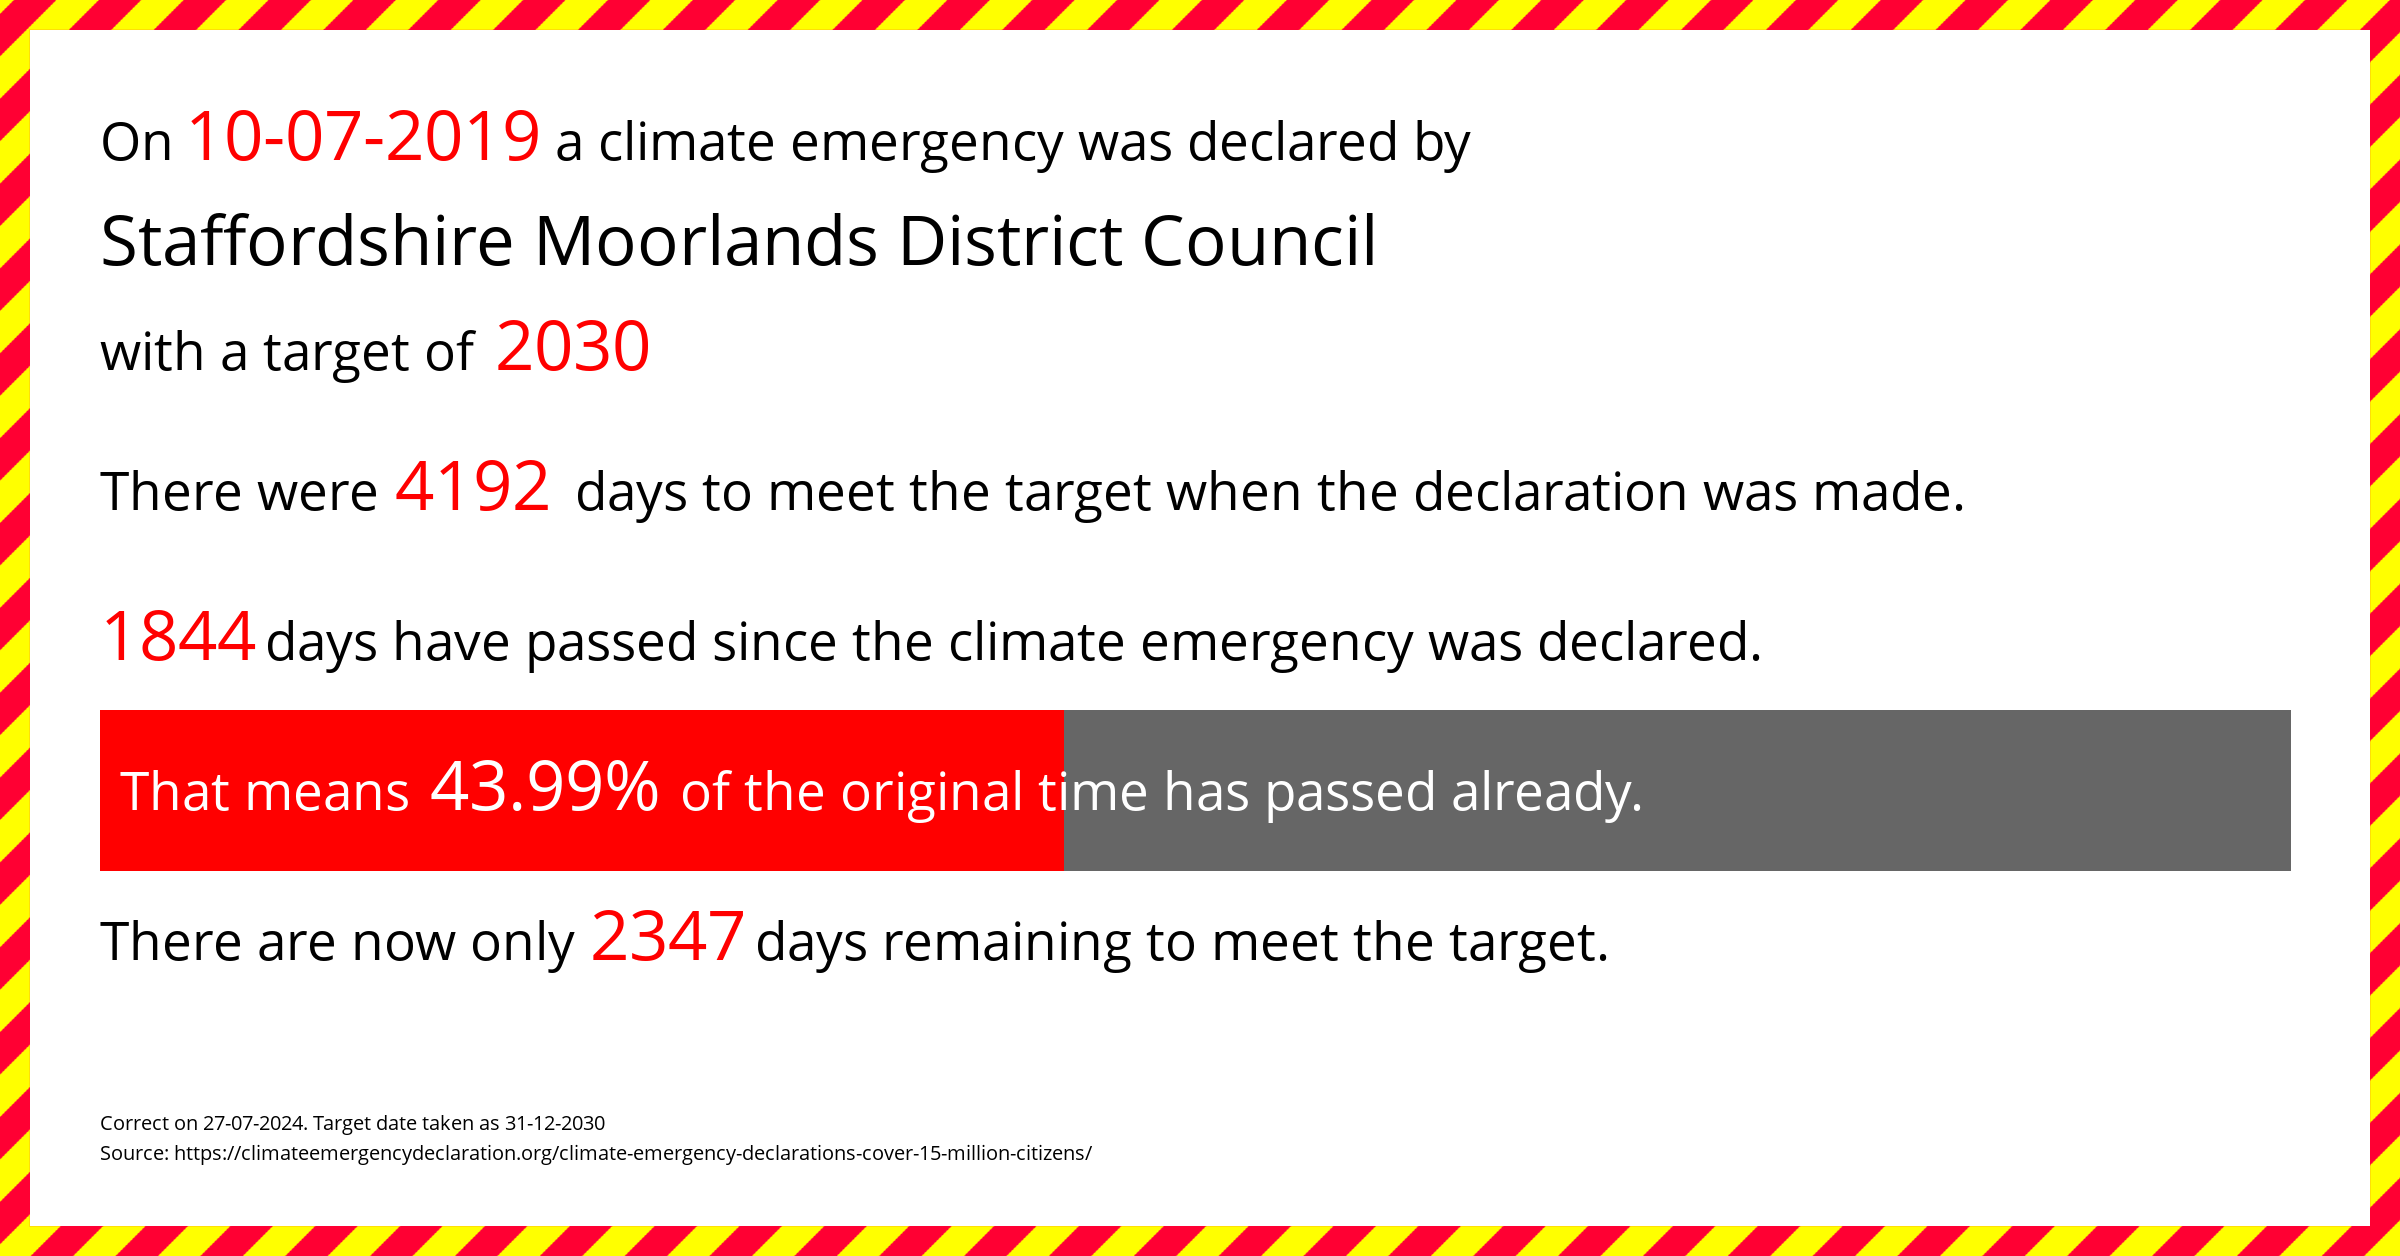 Staffordshire Moorlands District Council declared a Climate emergency on Wednesday 10th July 2019, with a target of 2030.